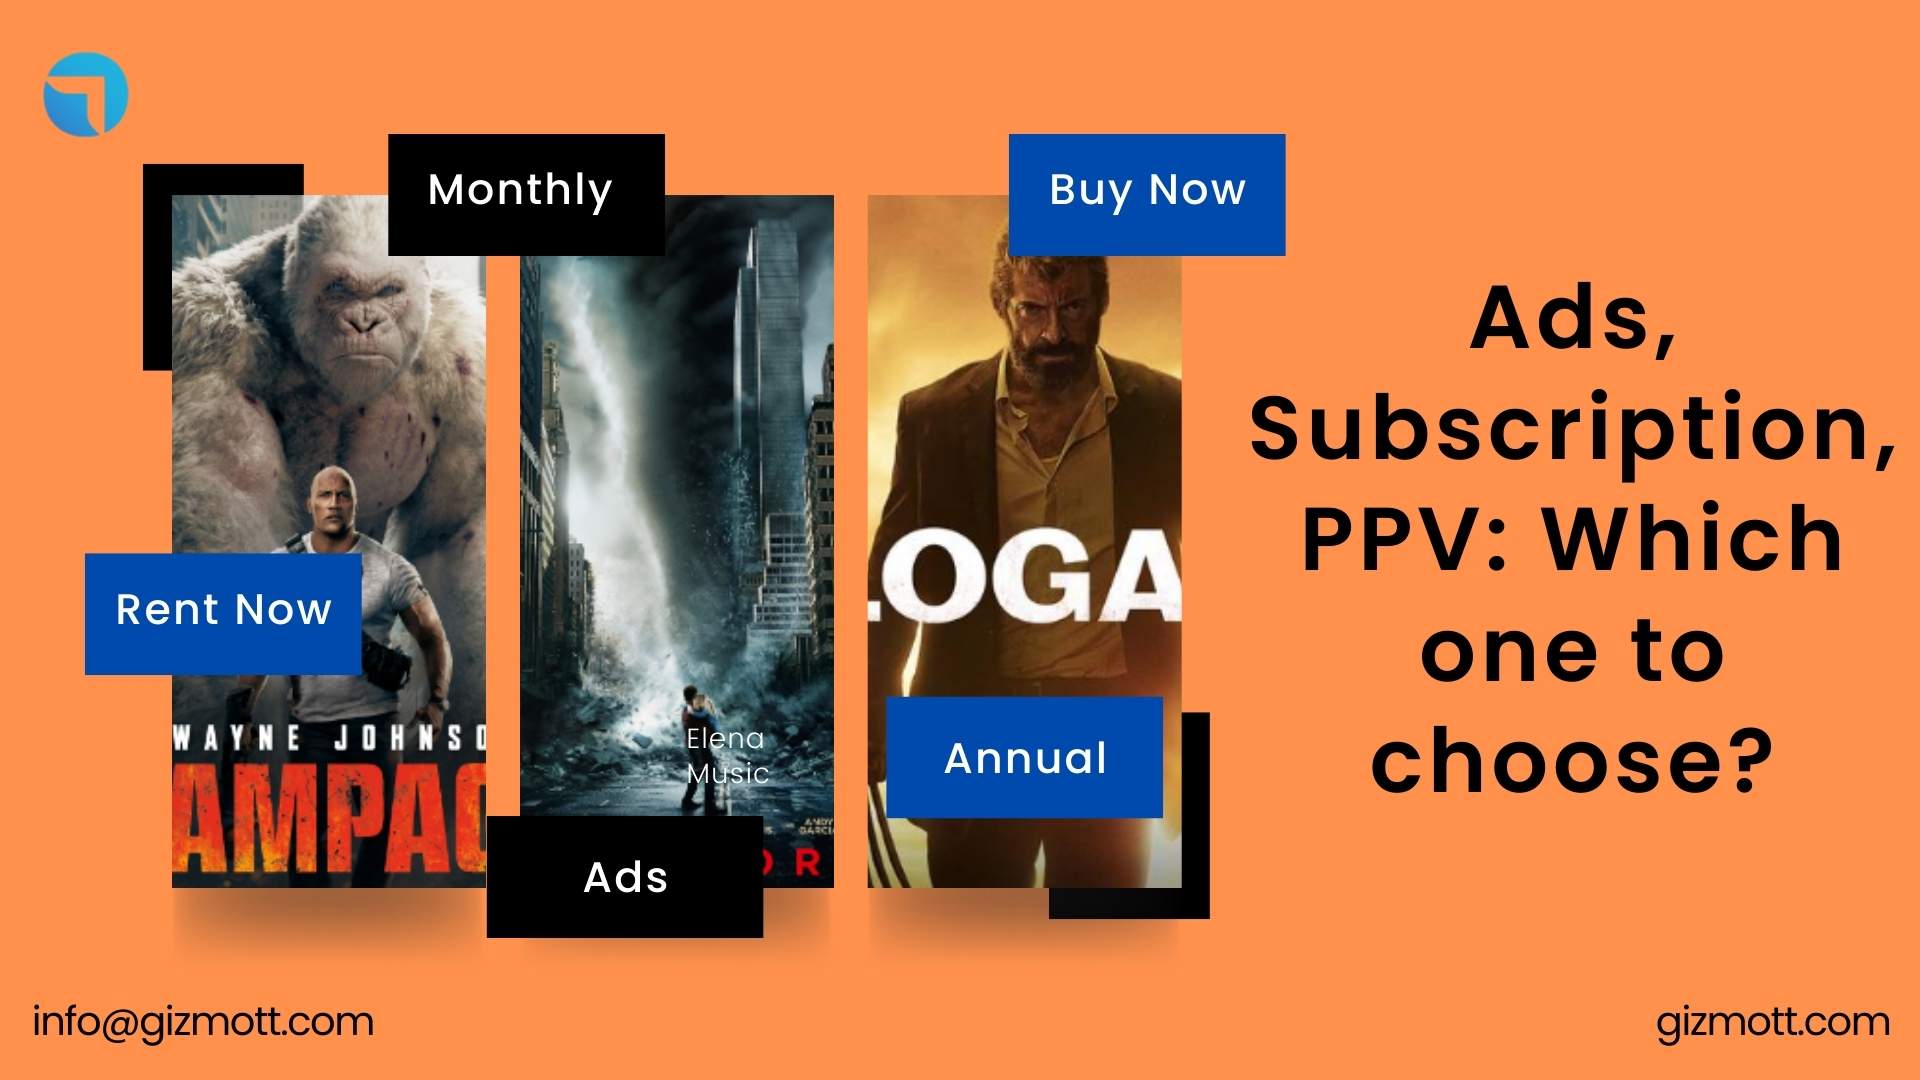 Ads, Subscription, PPV: Which one to choose?